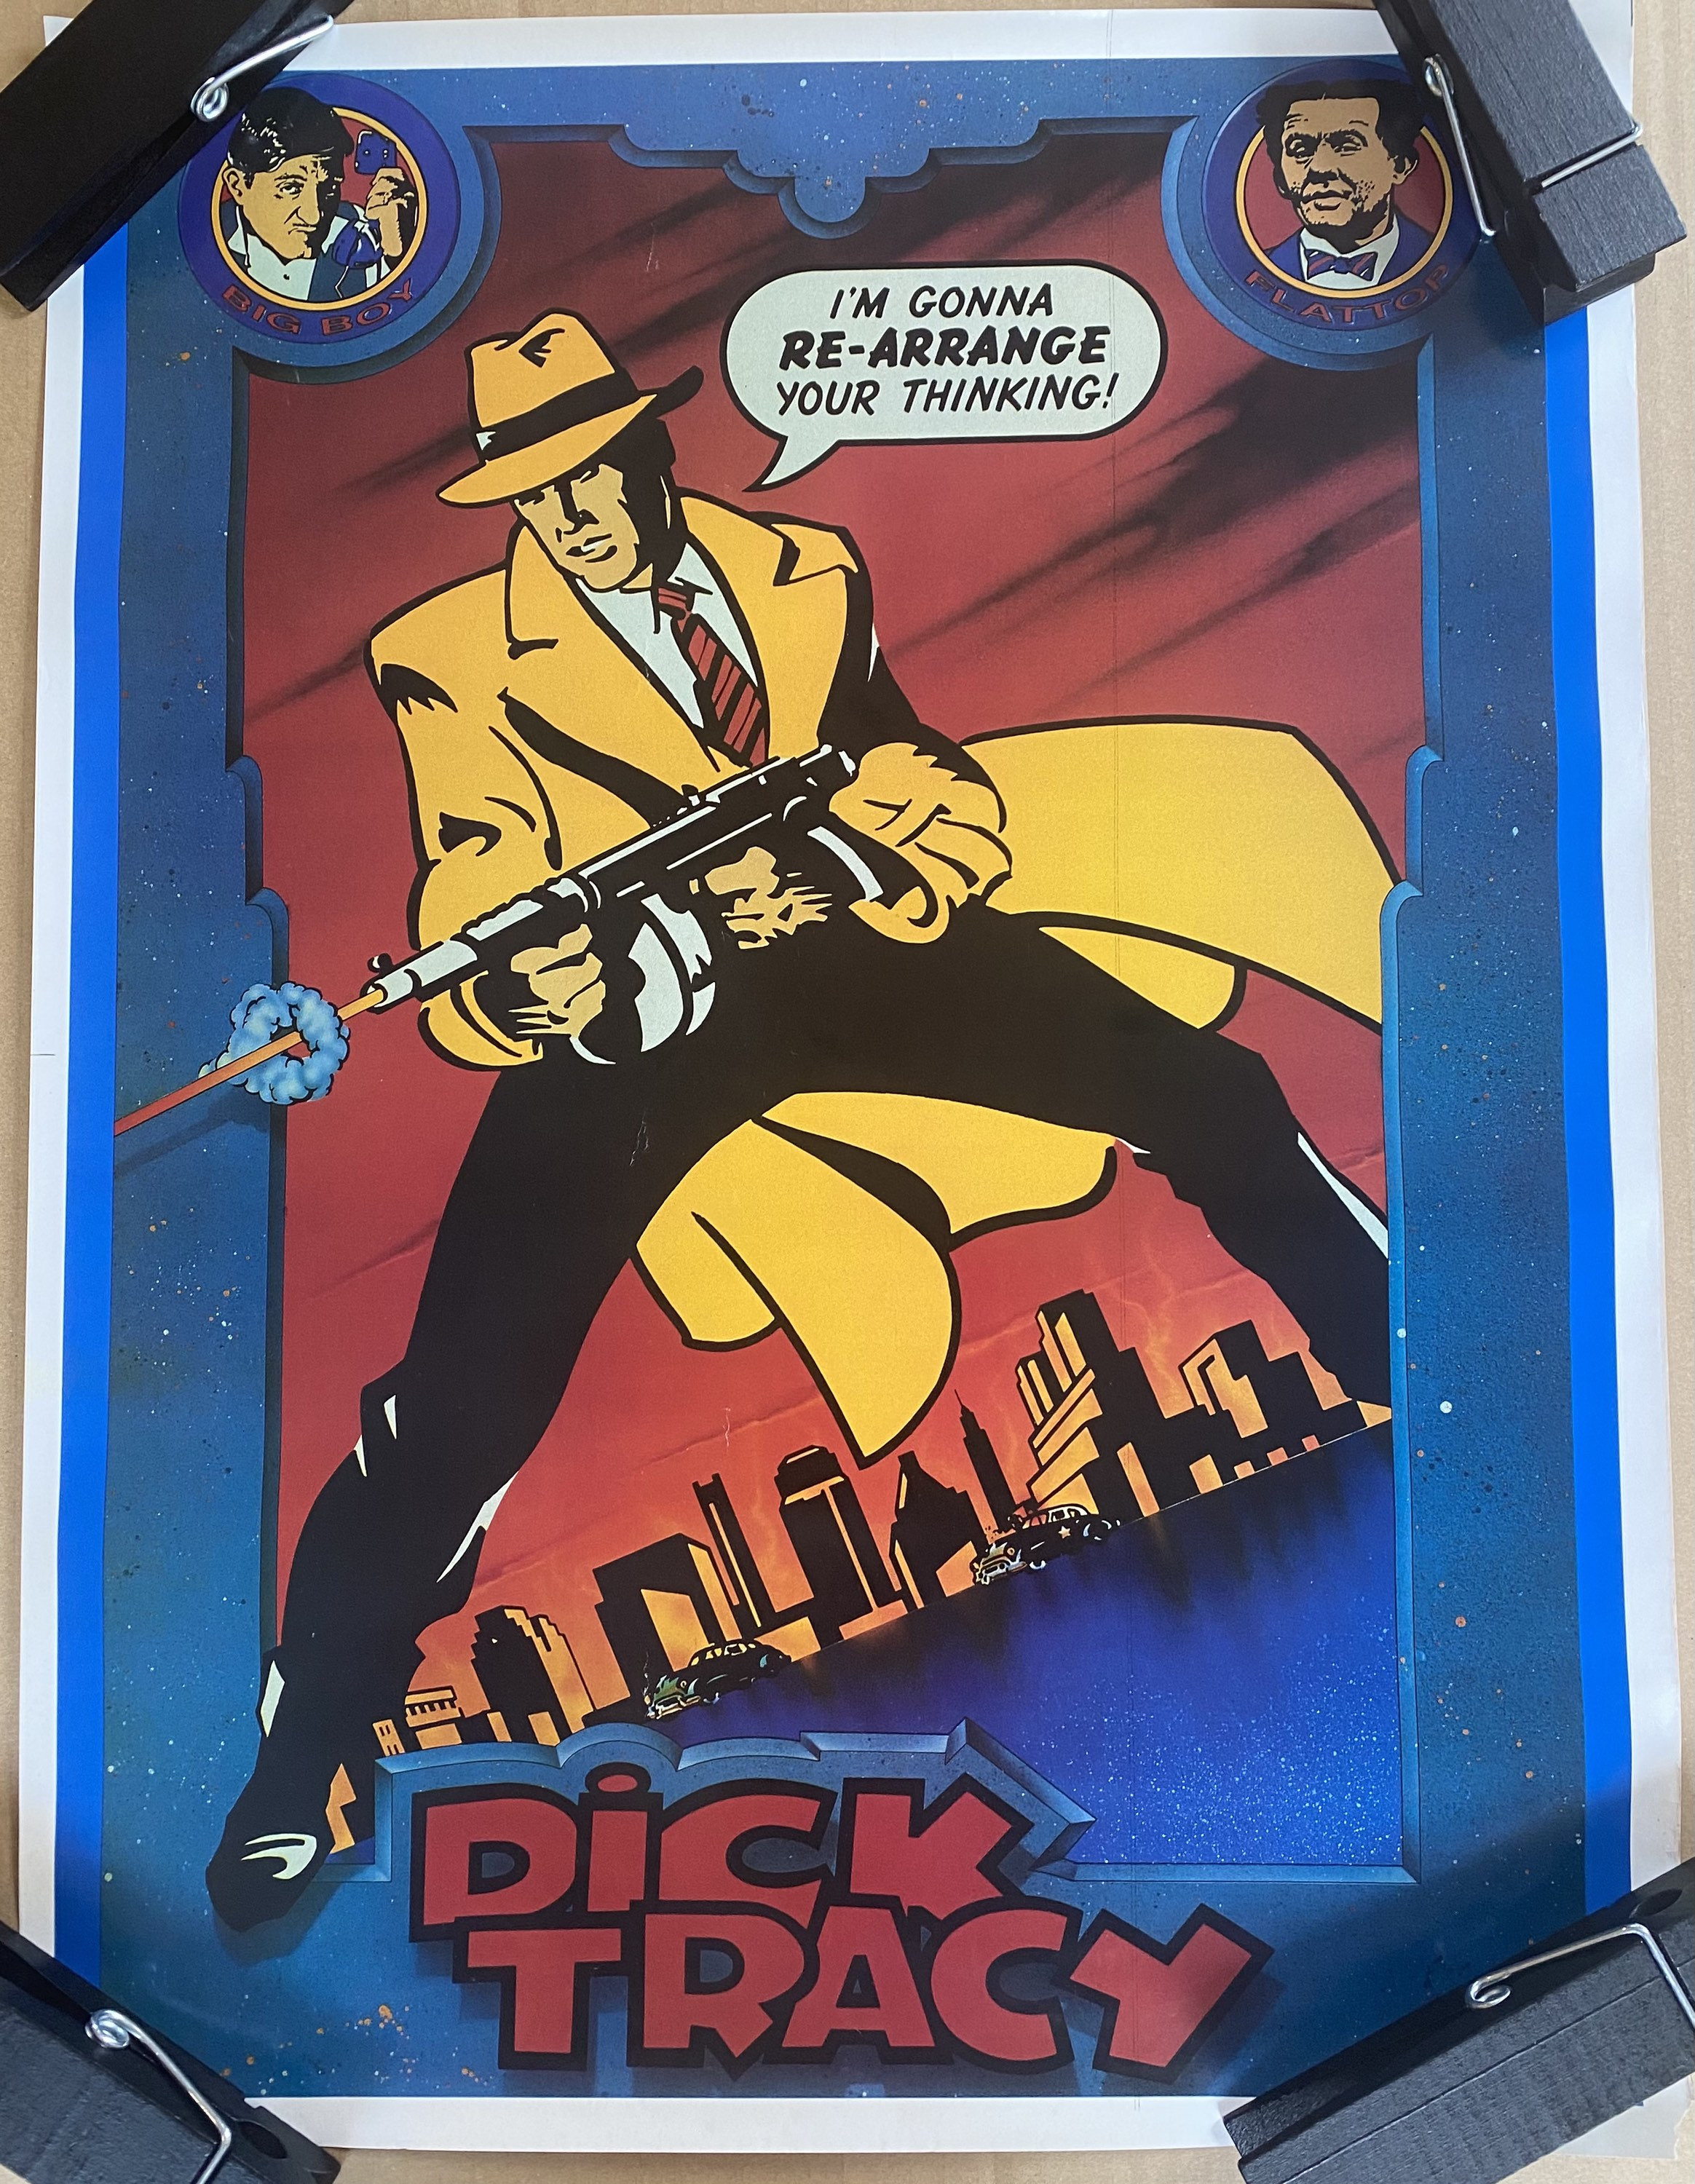 Dick Tracy Poster - Etsy